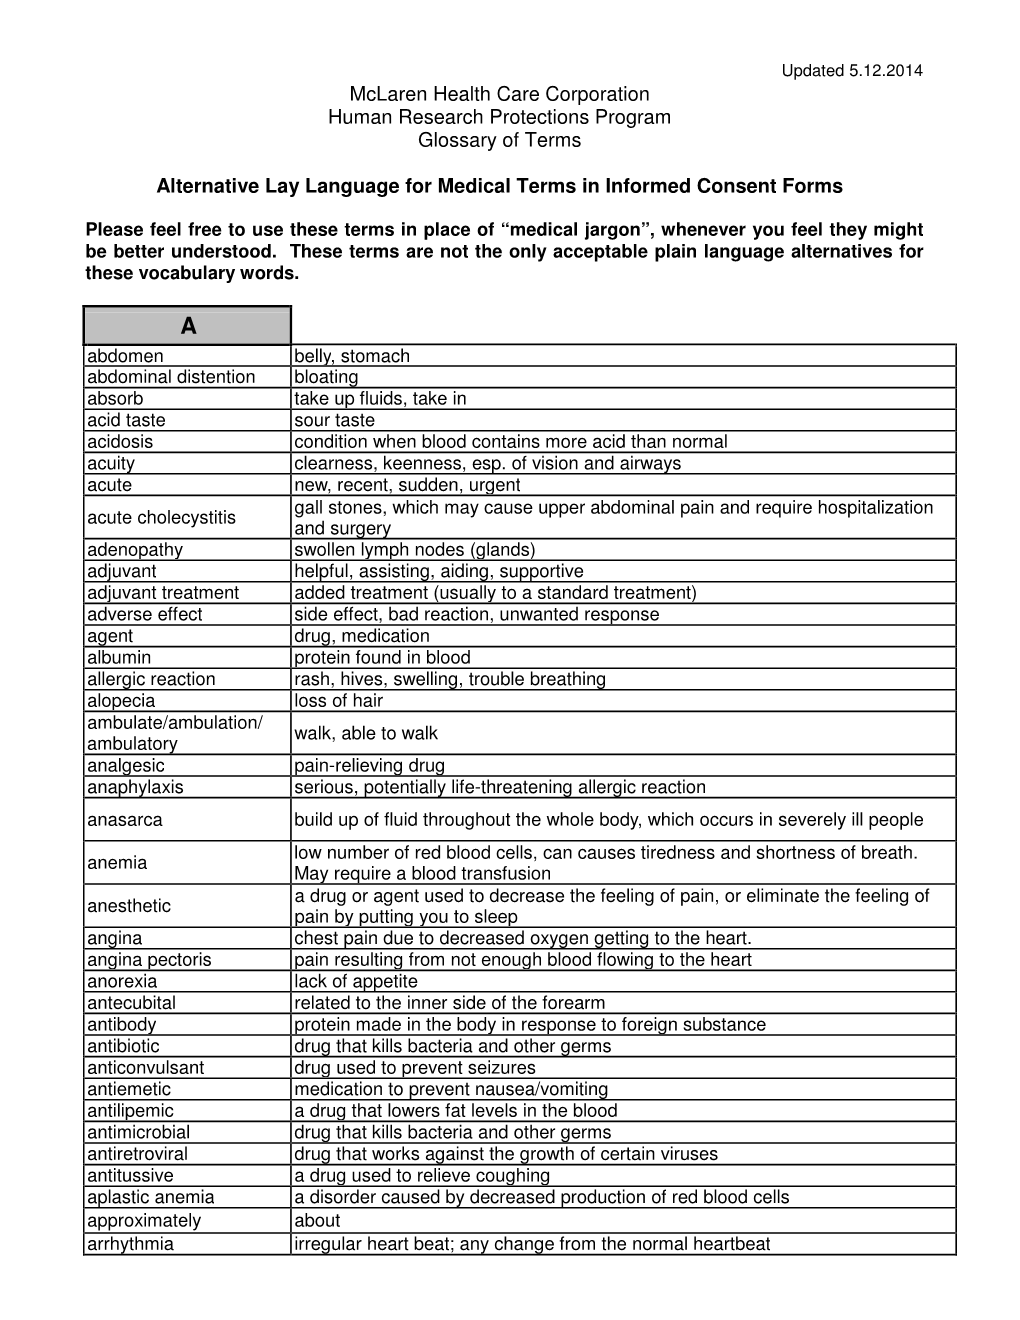 Lay Language Glossary for Medical Terminology